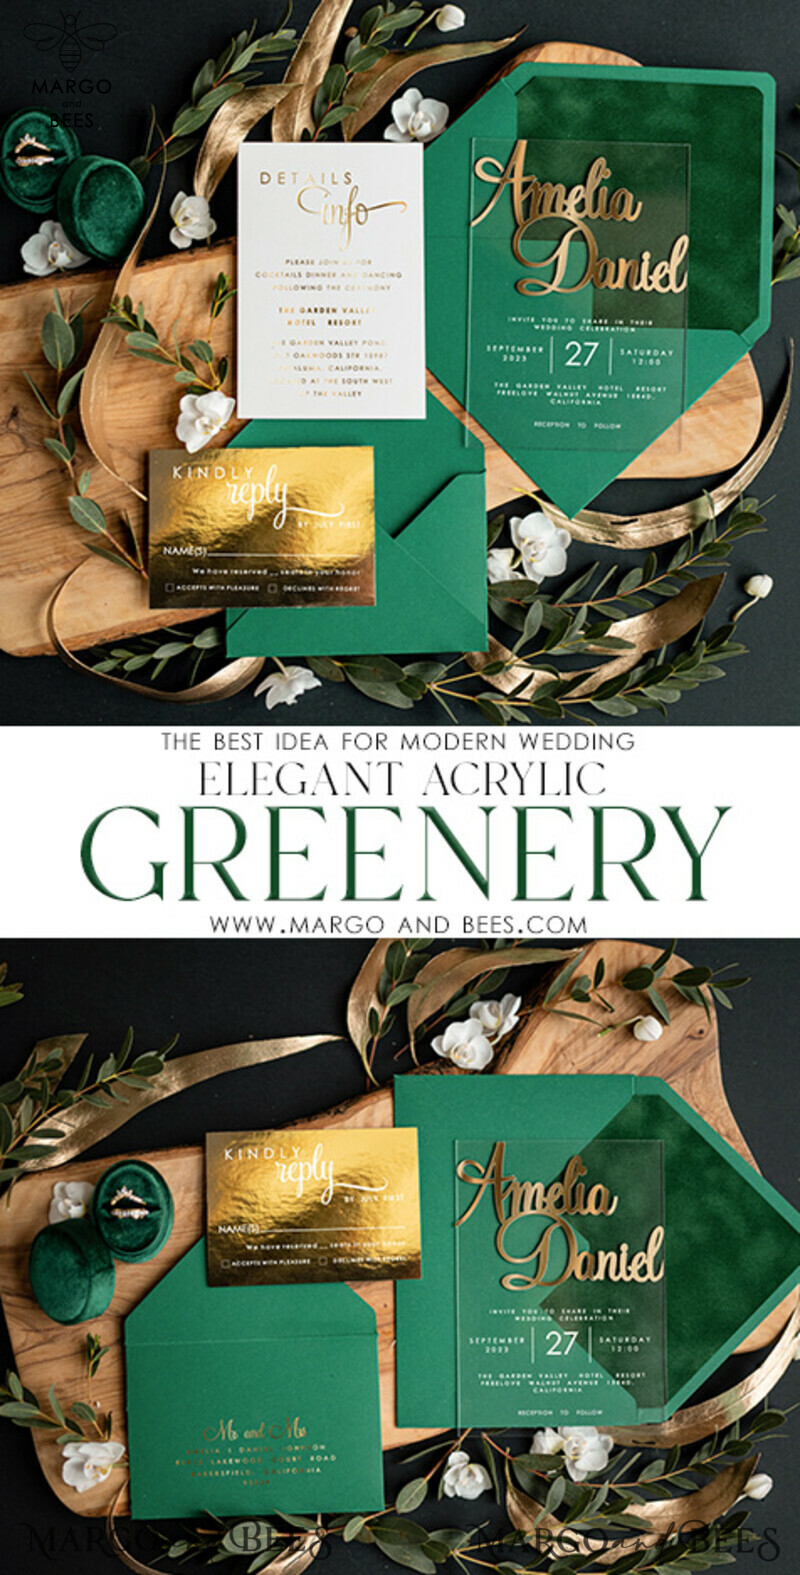 Glamorous Gold and Green Acrylic Wedding Invitations: A Luxury Emerald Green Wedding Invitation Suite with Golden Greenery Accents-3